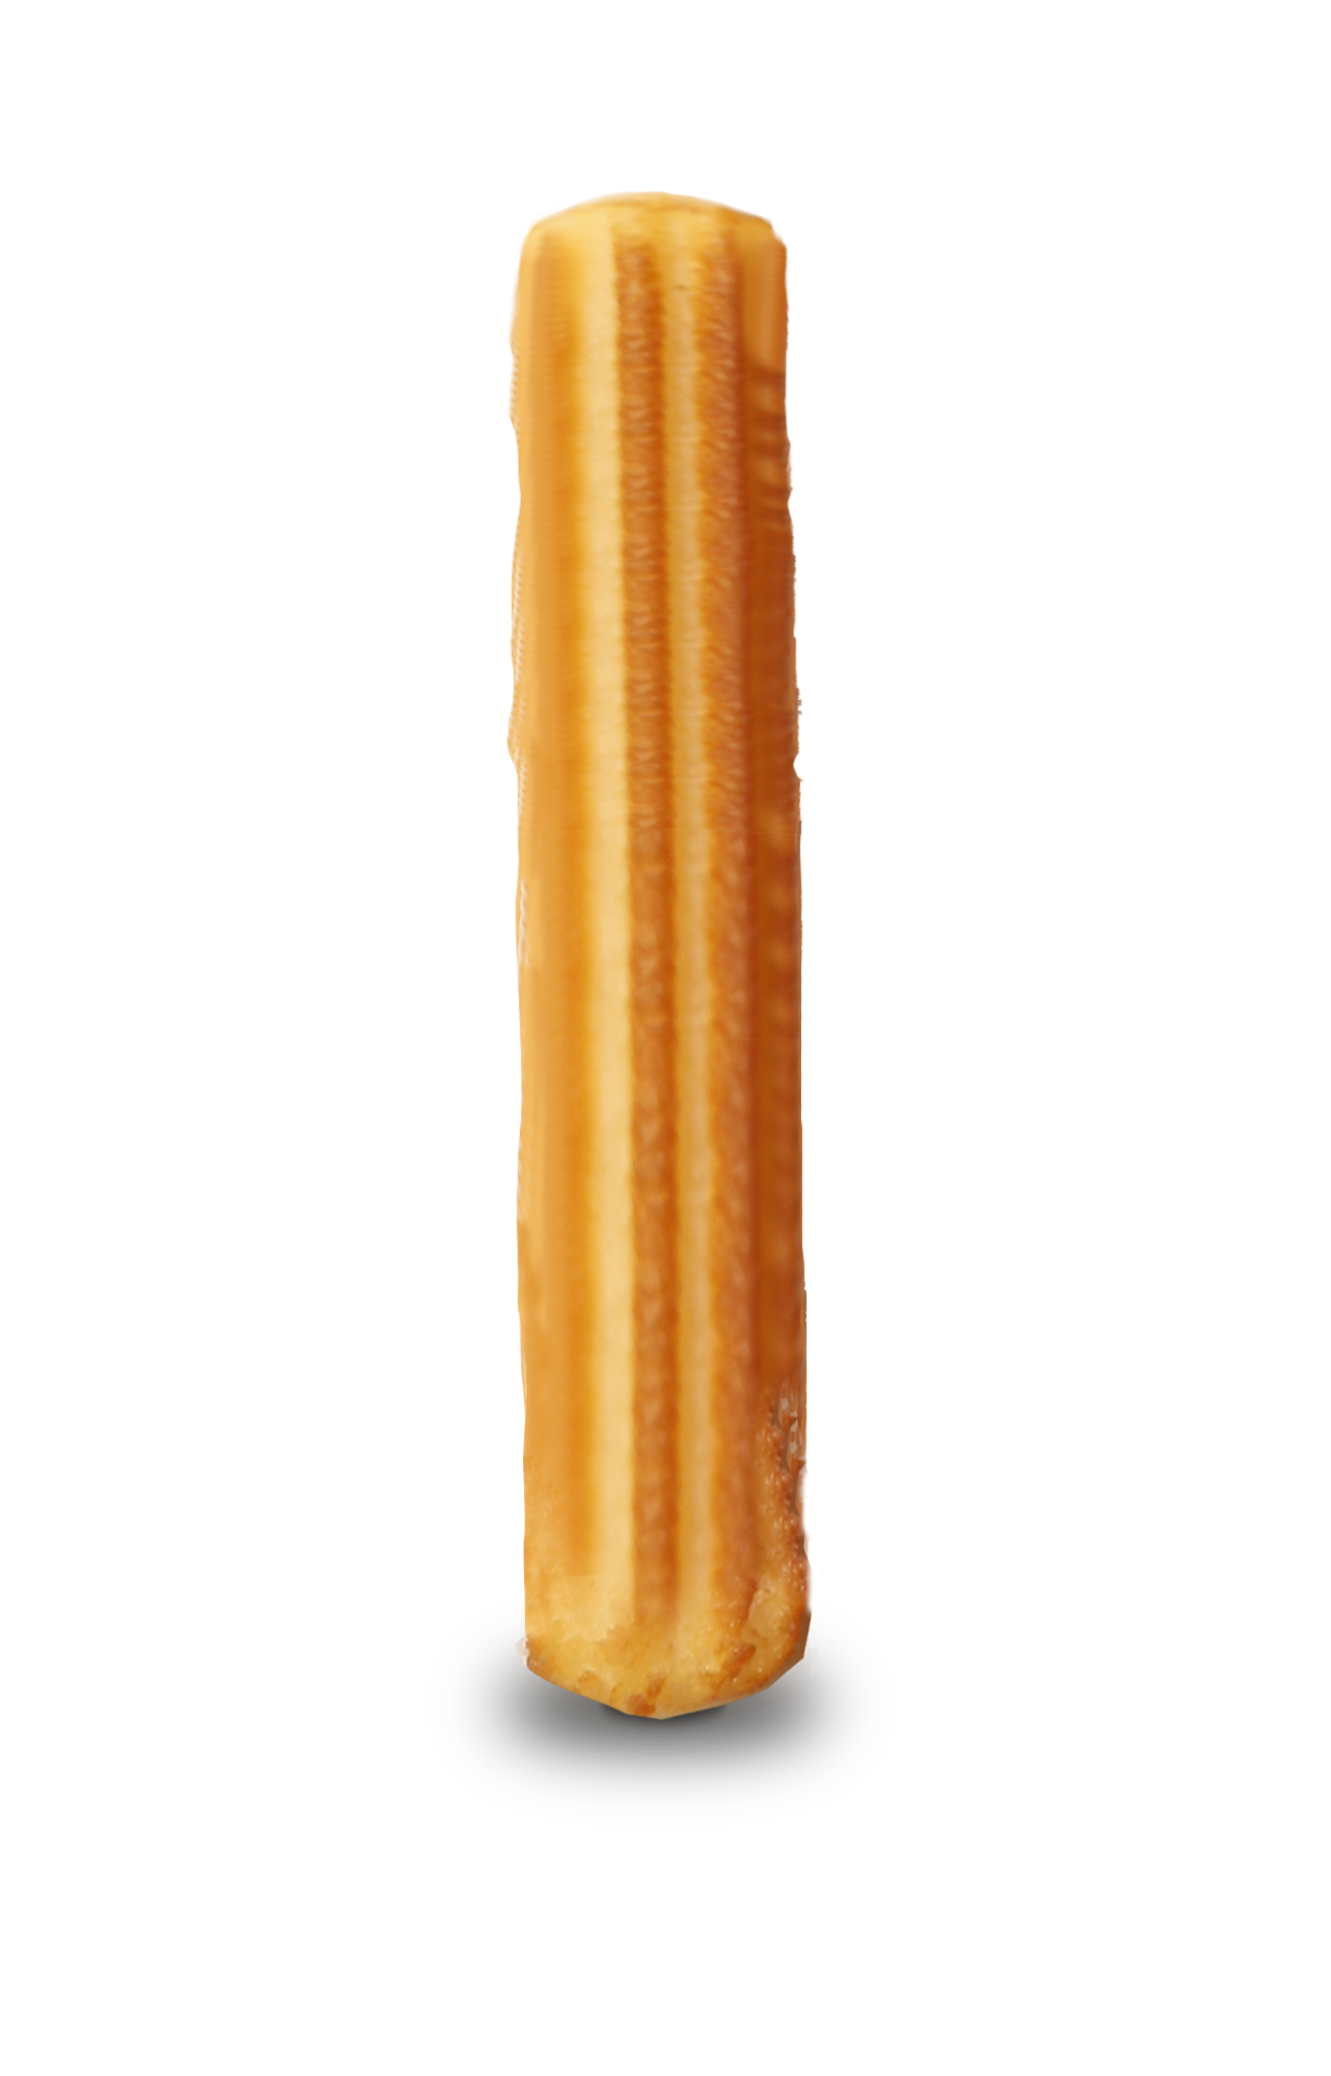 Churro PNG Beeld Transparante achtergrond